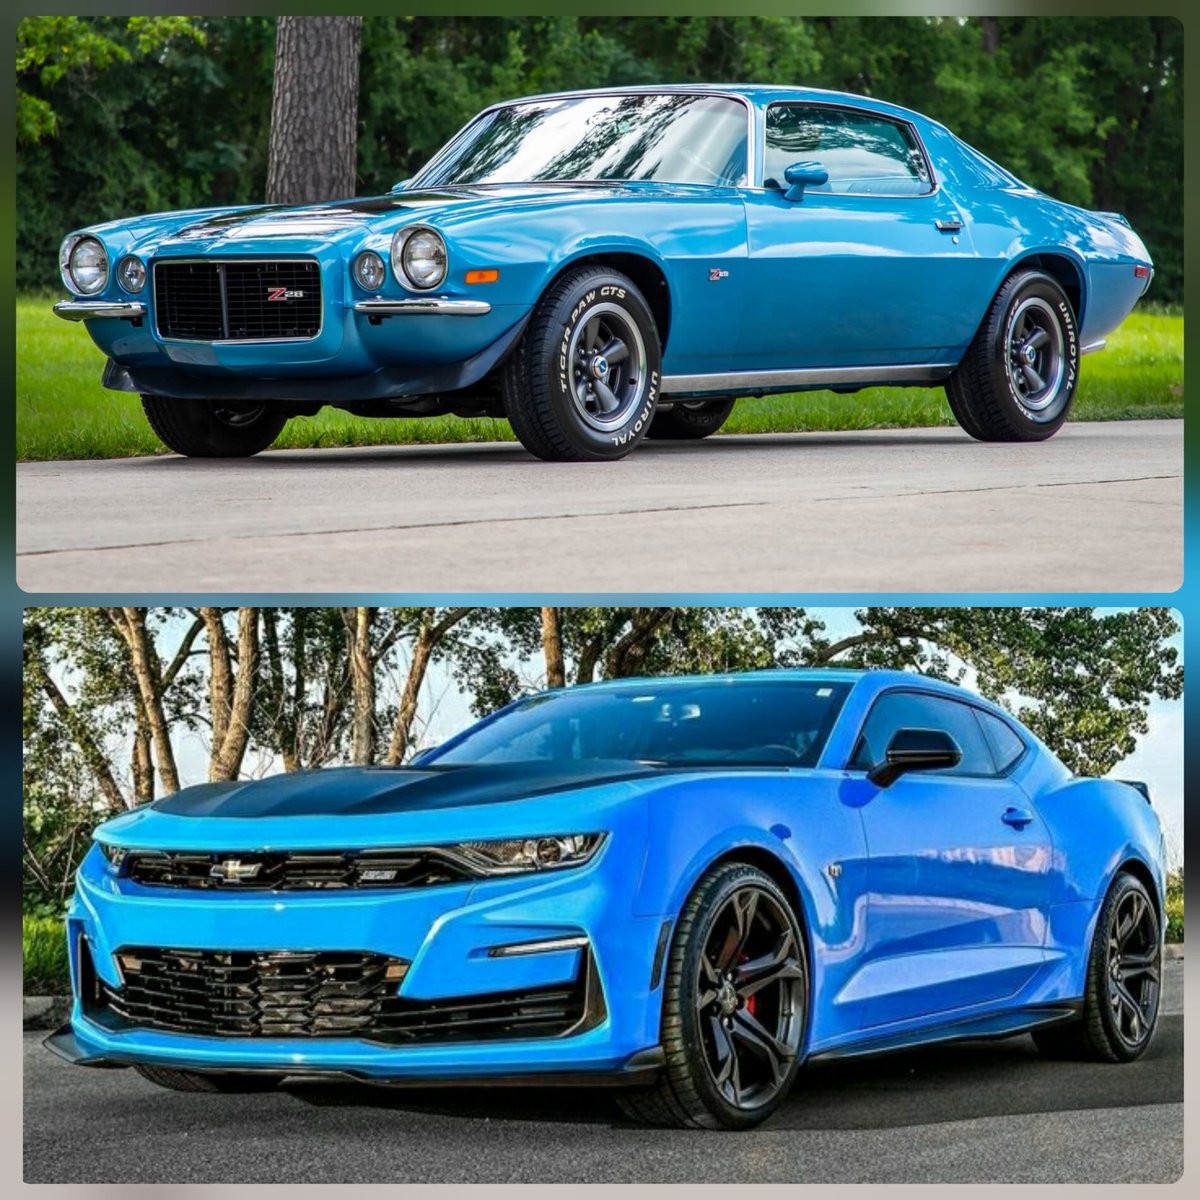 Old or new??

#Chevy #chevrolet #Camaro #z28 #ss1le #classiccars #AmericanMuscle #v8